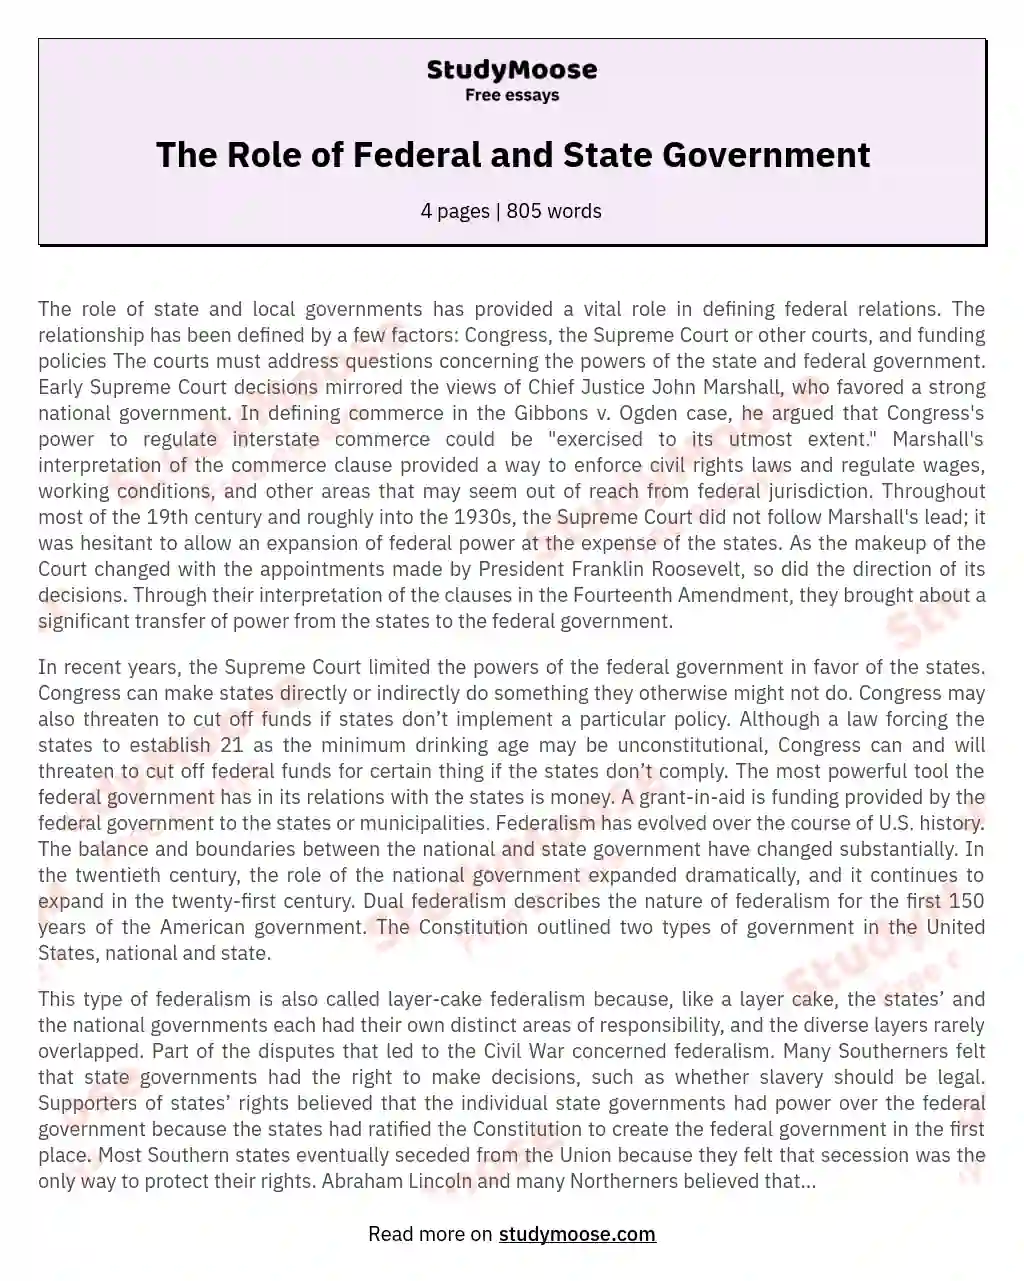 The Role of Federal and State Government